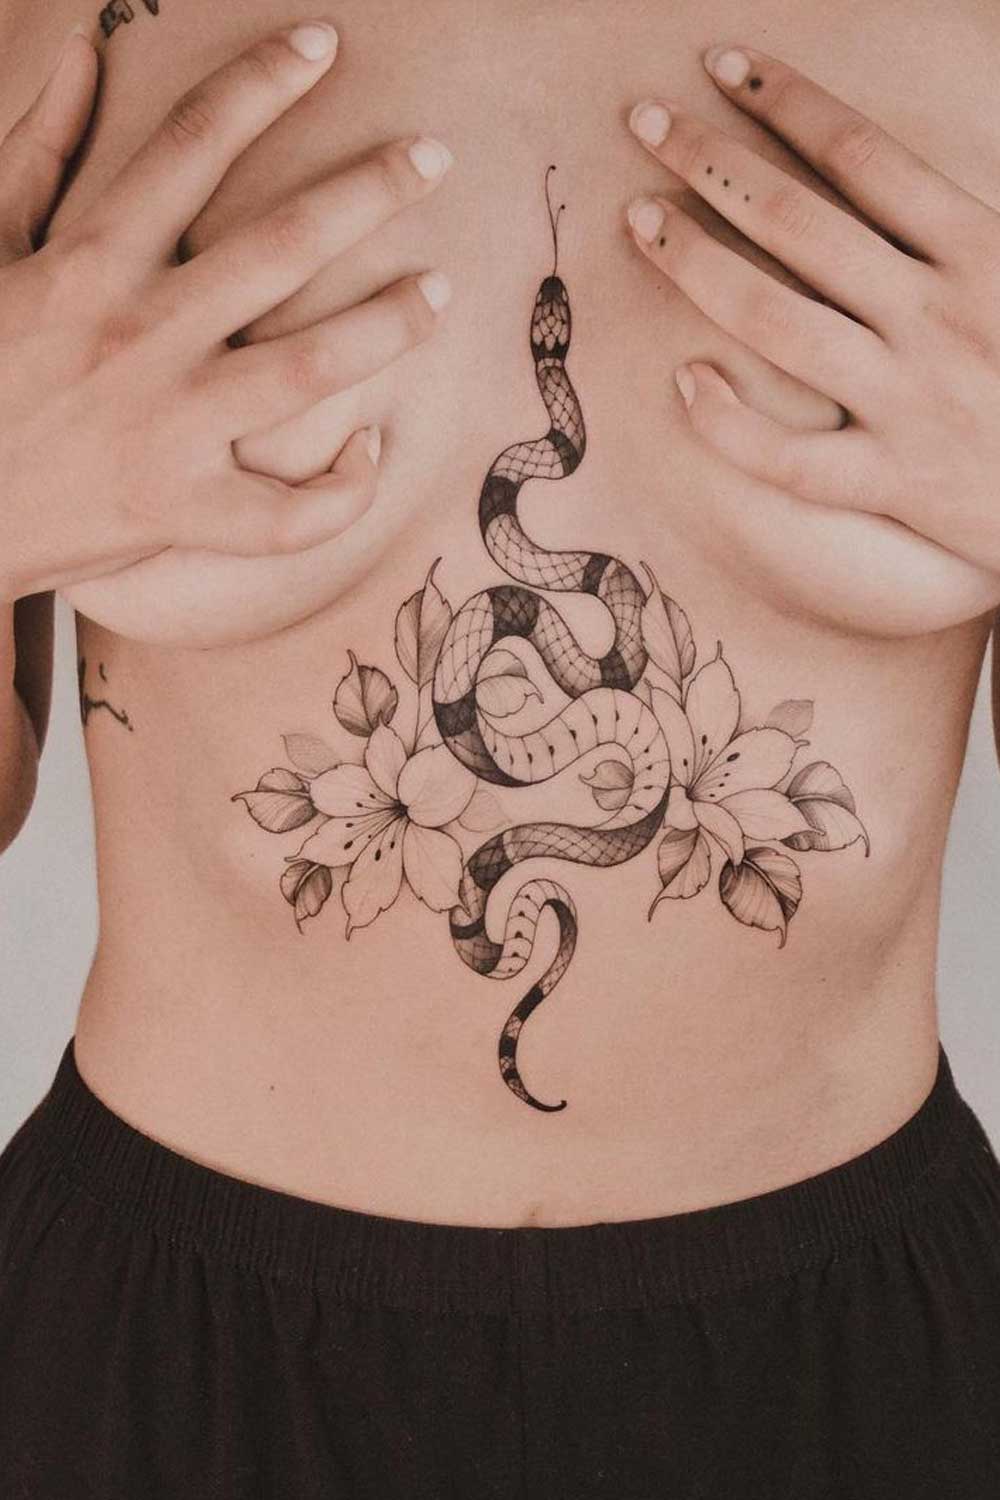 Sternum Tattoos: Design, Themes, And Ideas